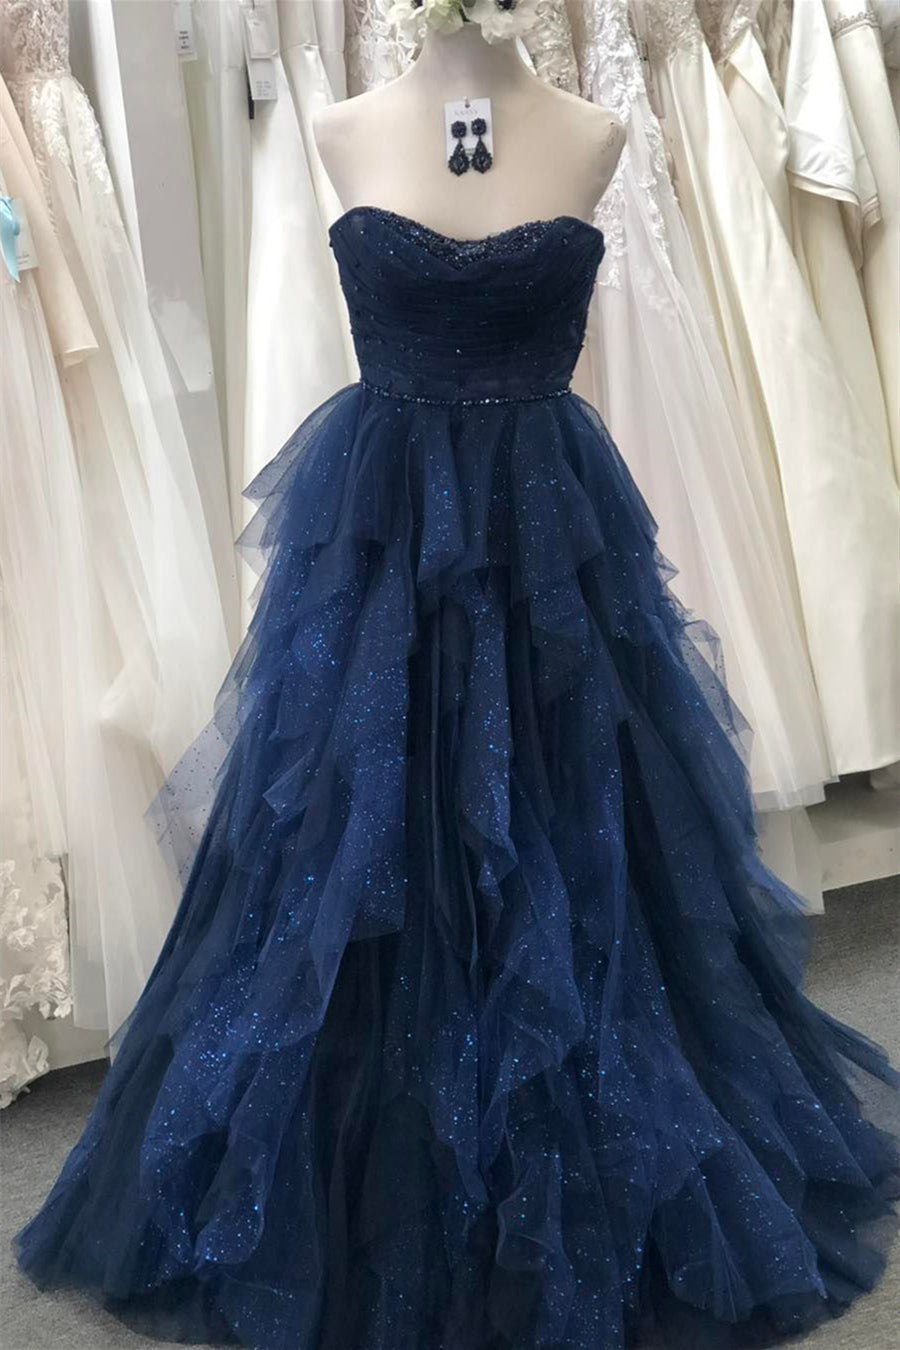 Party Dress For Girl, Sparkly Navy Blue Strapless Ruffle Layers Tulle Long Prom Dress